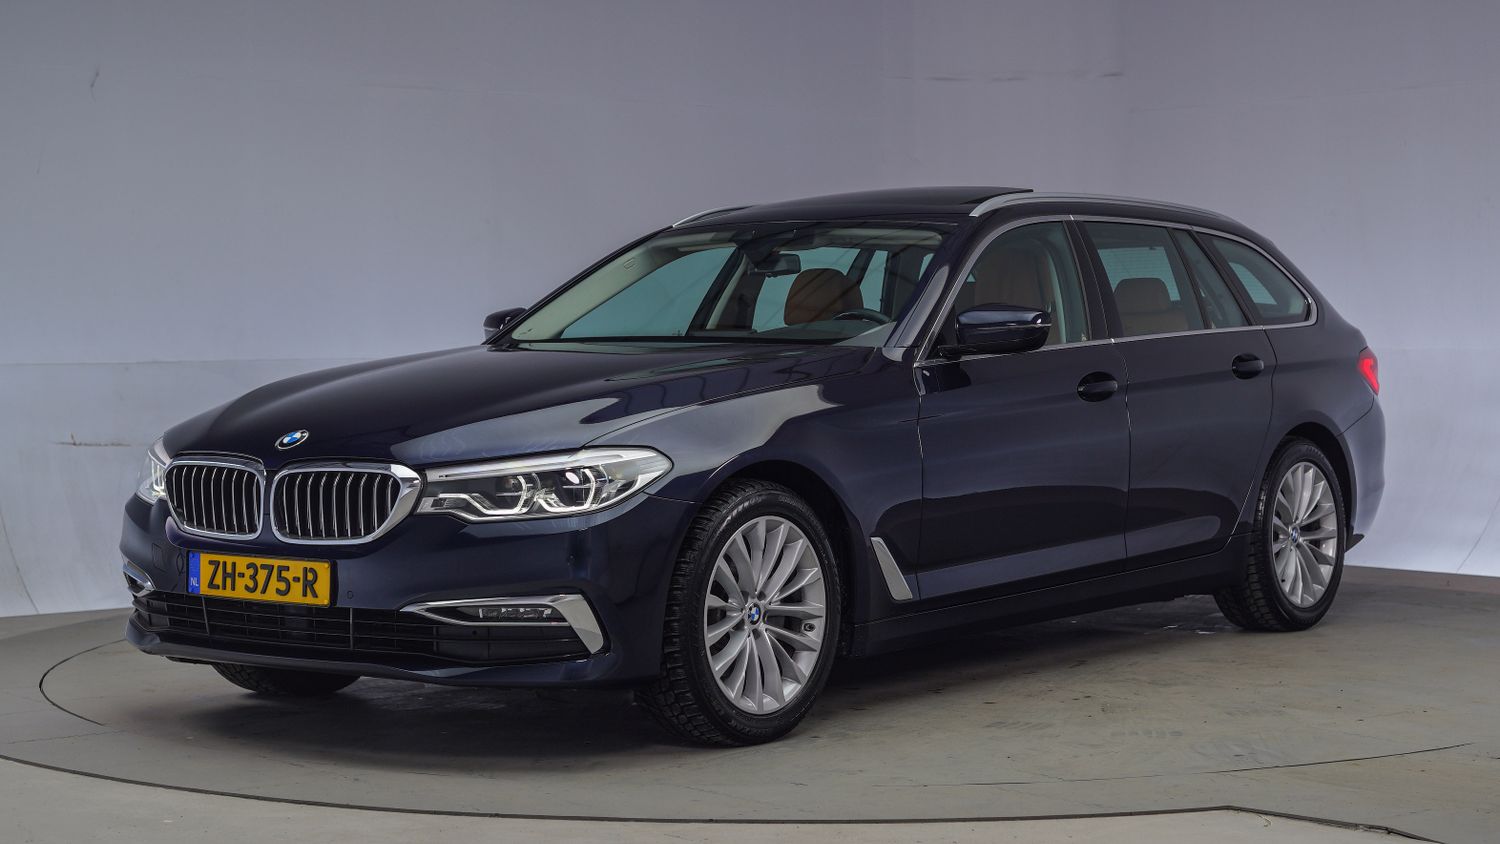 BMW 5-serie Station 2019 ZH-375-R 1